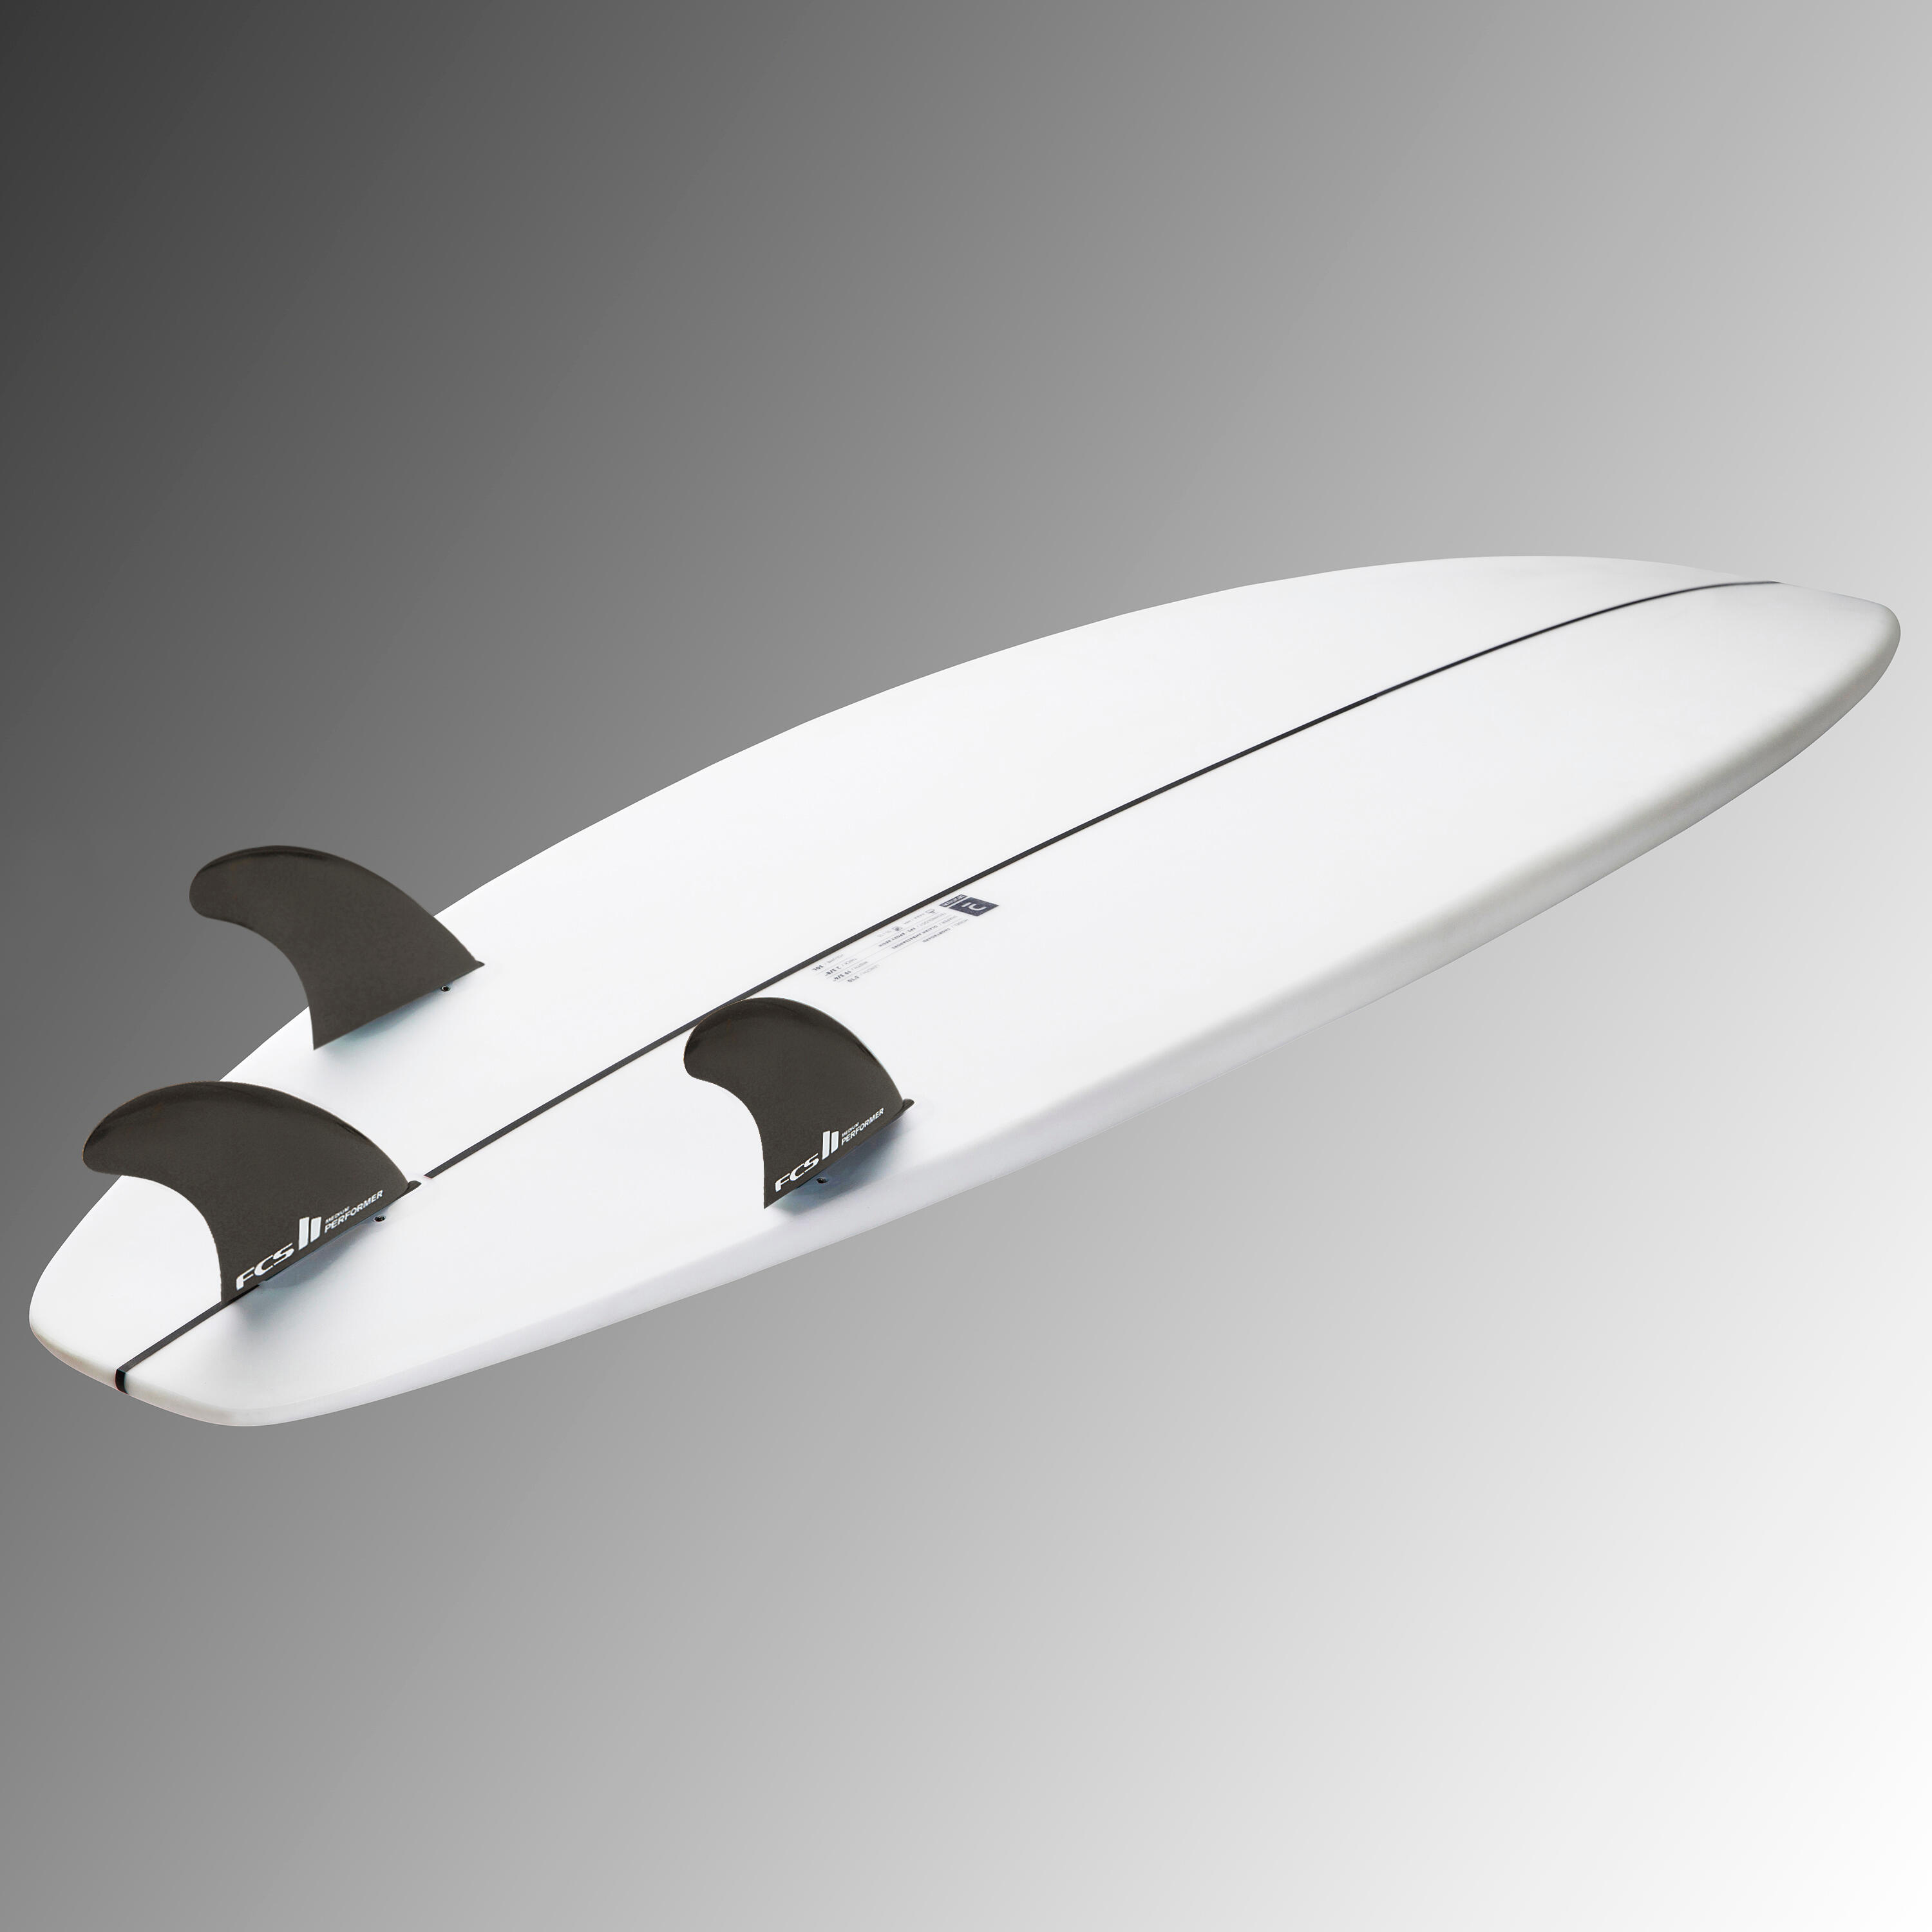 SHORTBOARD 900 5'10" 30 L. Supplied with 3 FCS2 fins 10/19